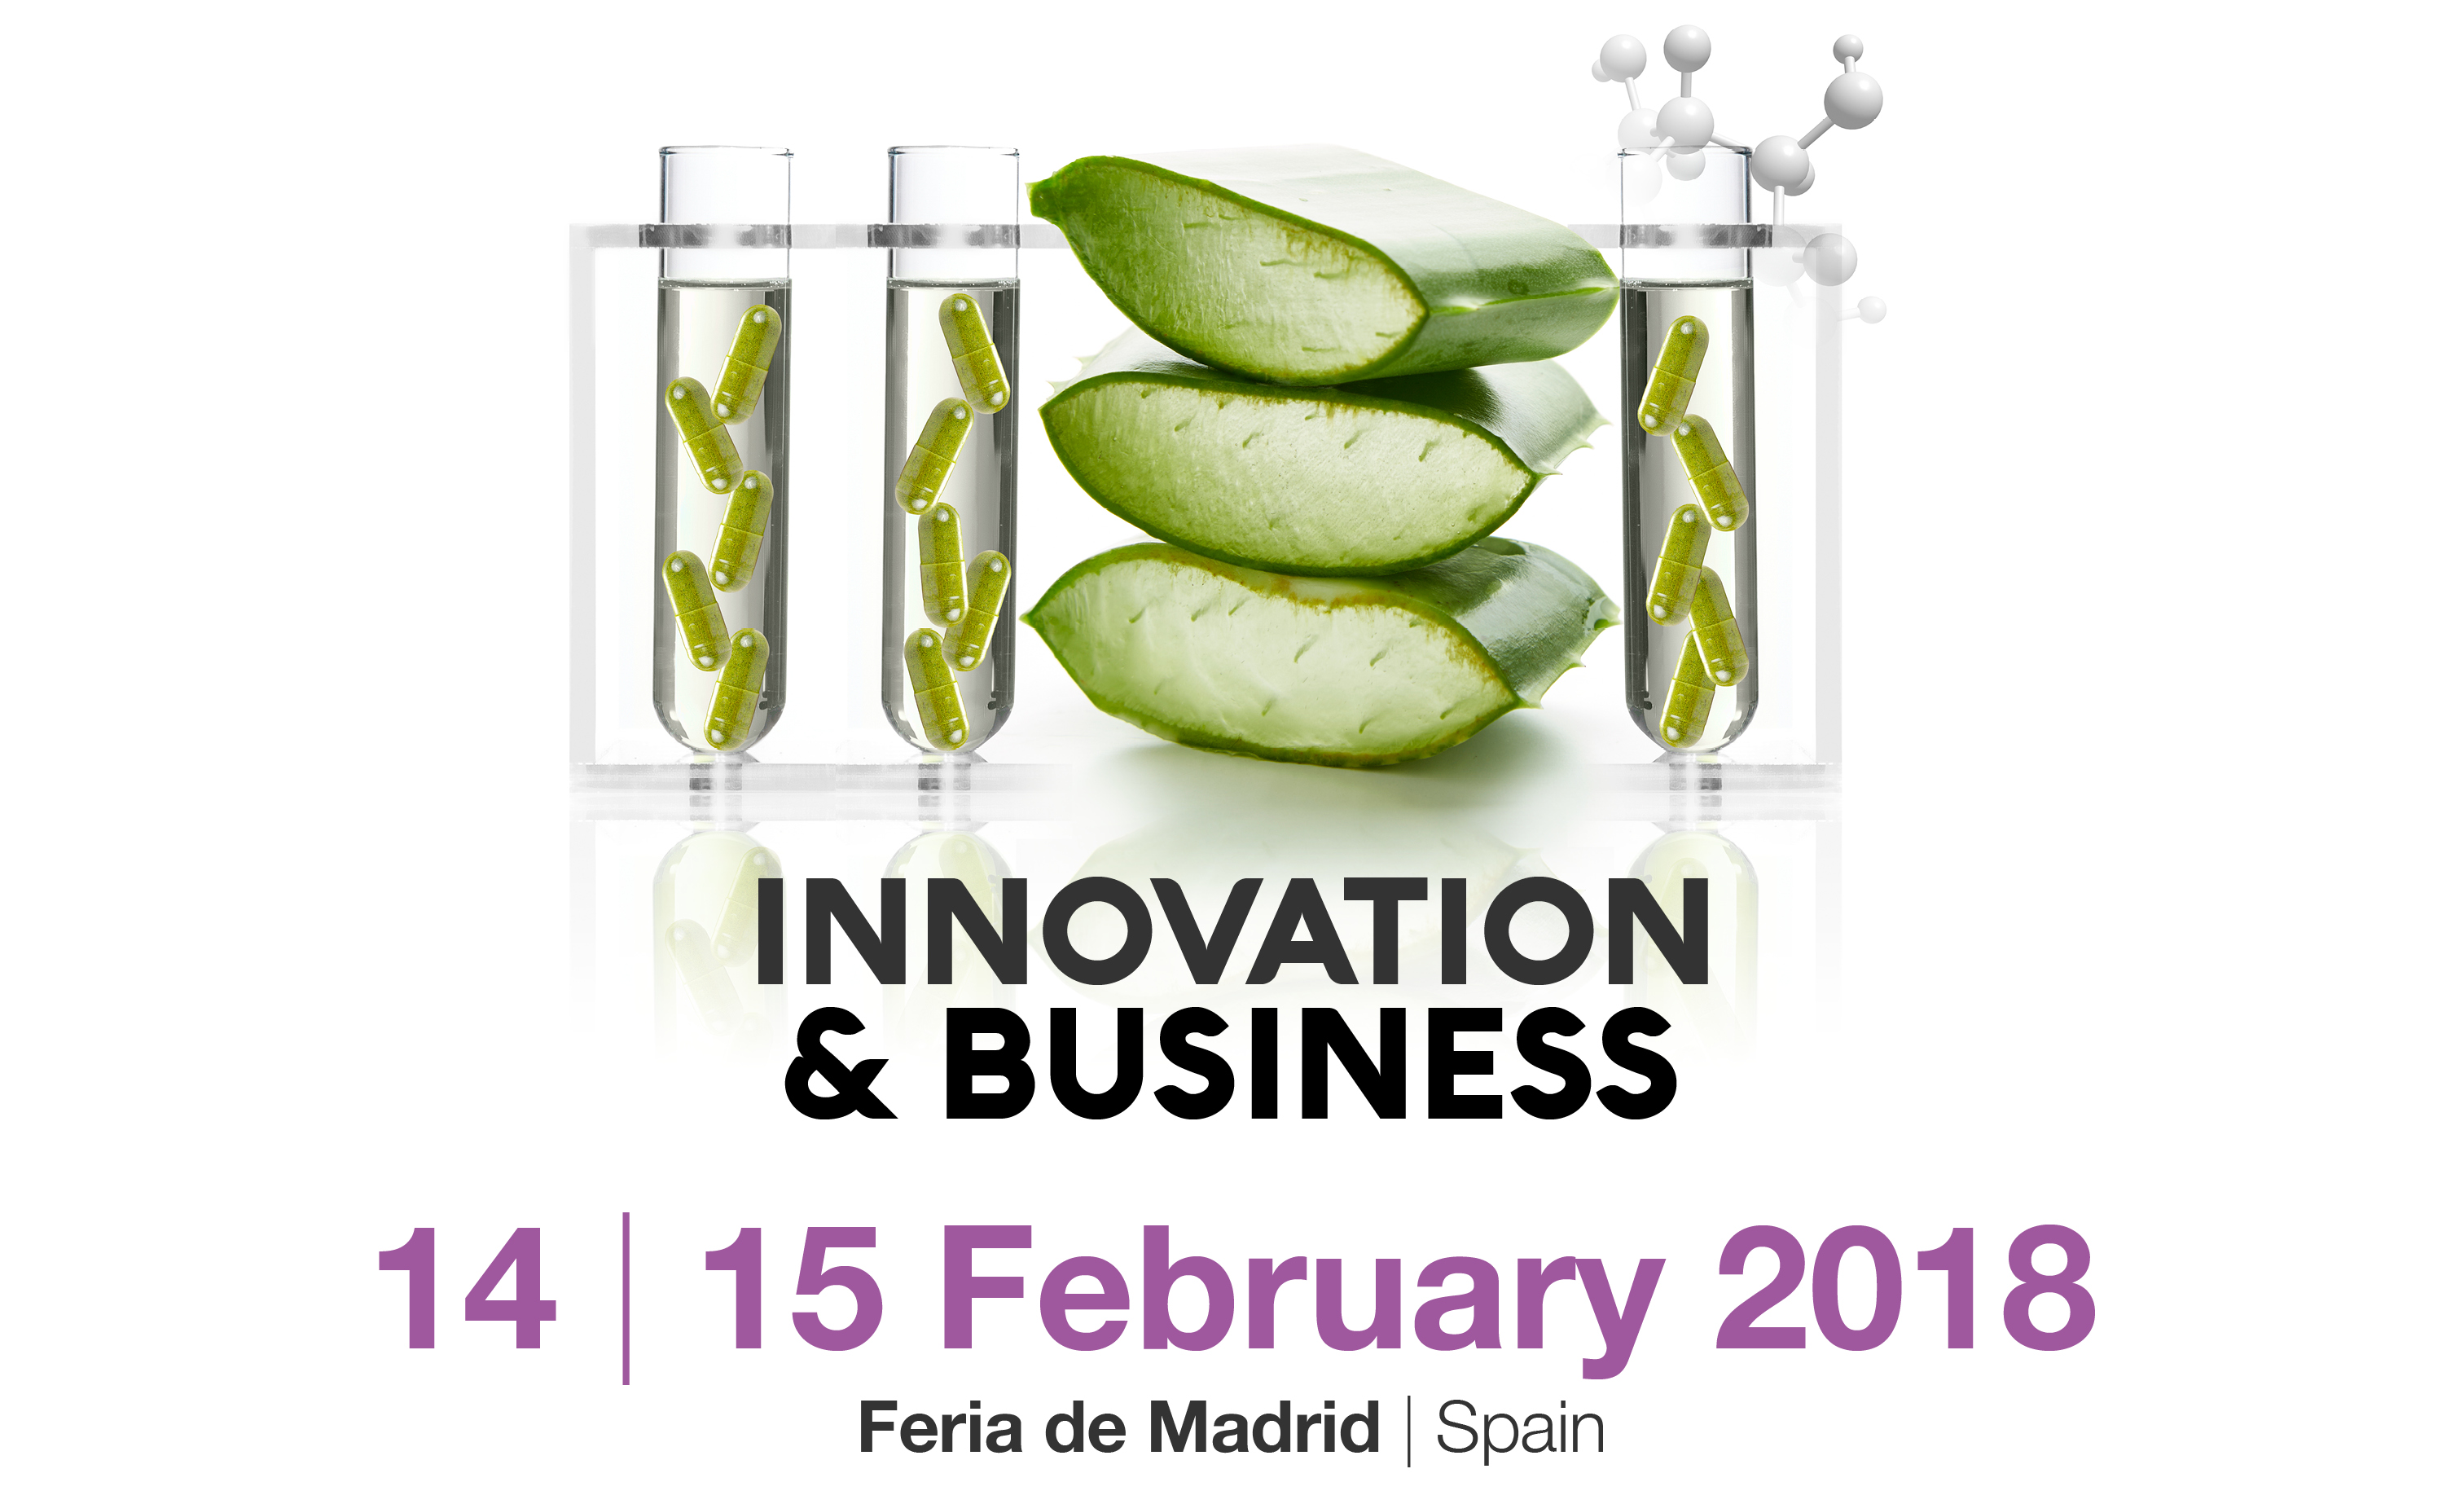 You are currently viewing NUTRACEUTICALS Europe – Summit & Expo announces its second edition under the motto “Innovation & Business” with the aim of becoming a referent point for innovation in the functional ingredients industry.